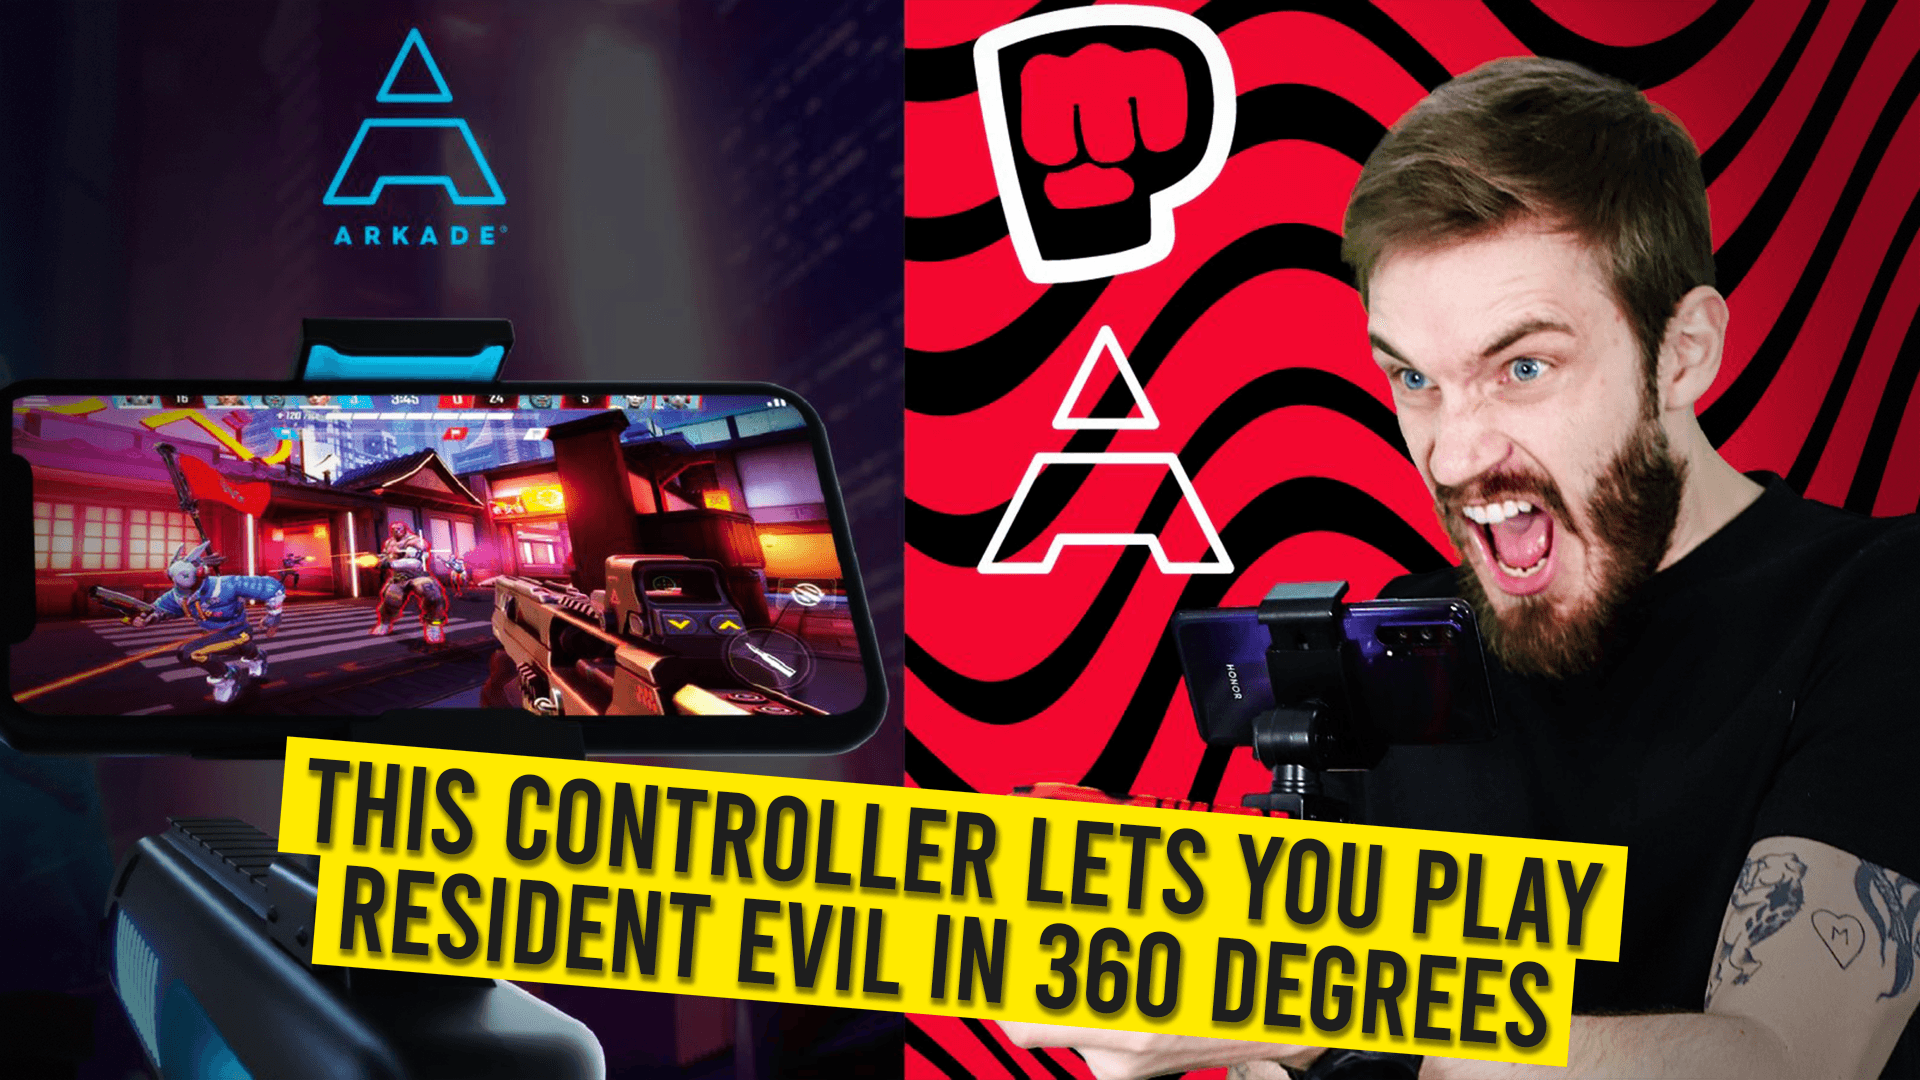 This Controller Lets You Play Resident Evil in 360 Degrees